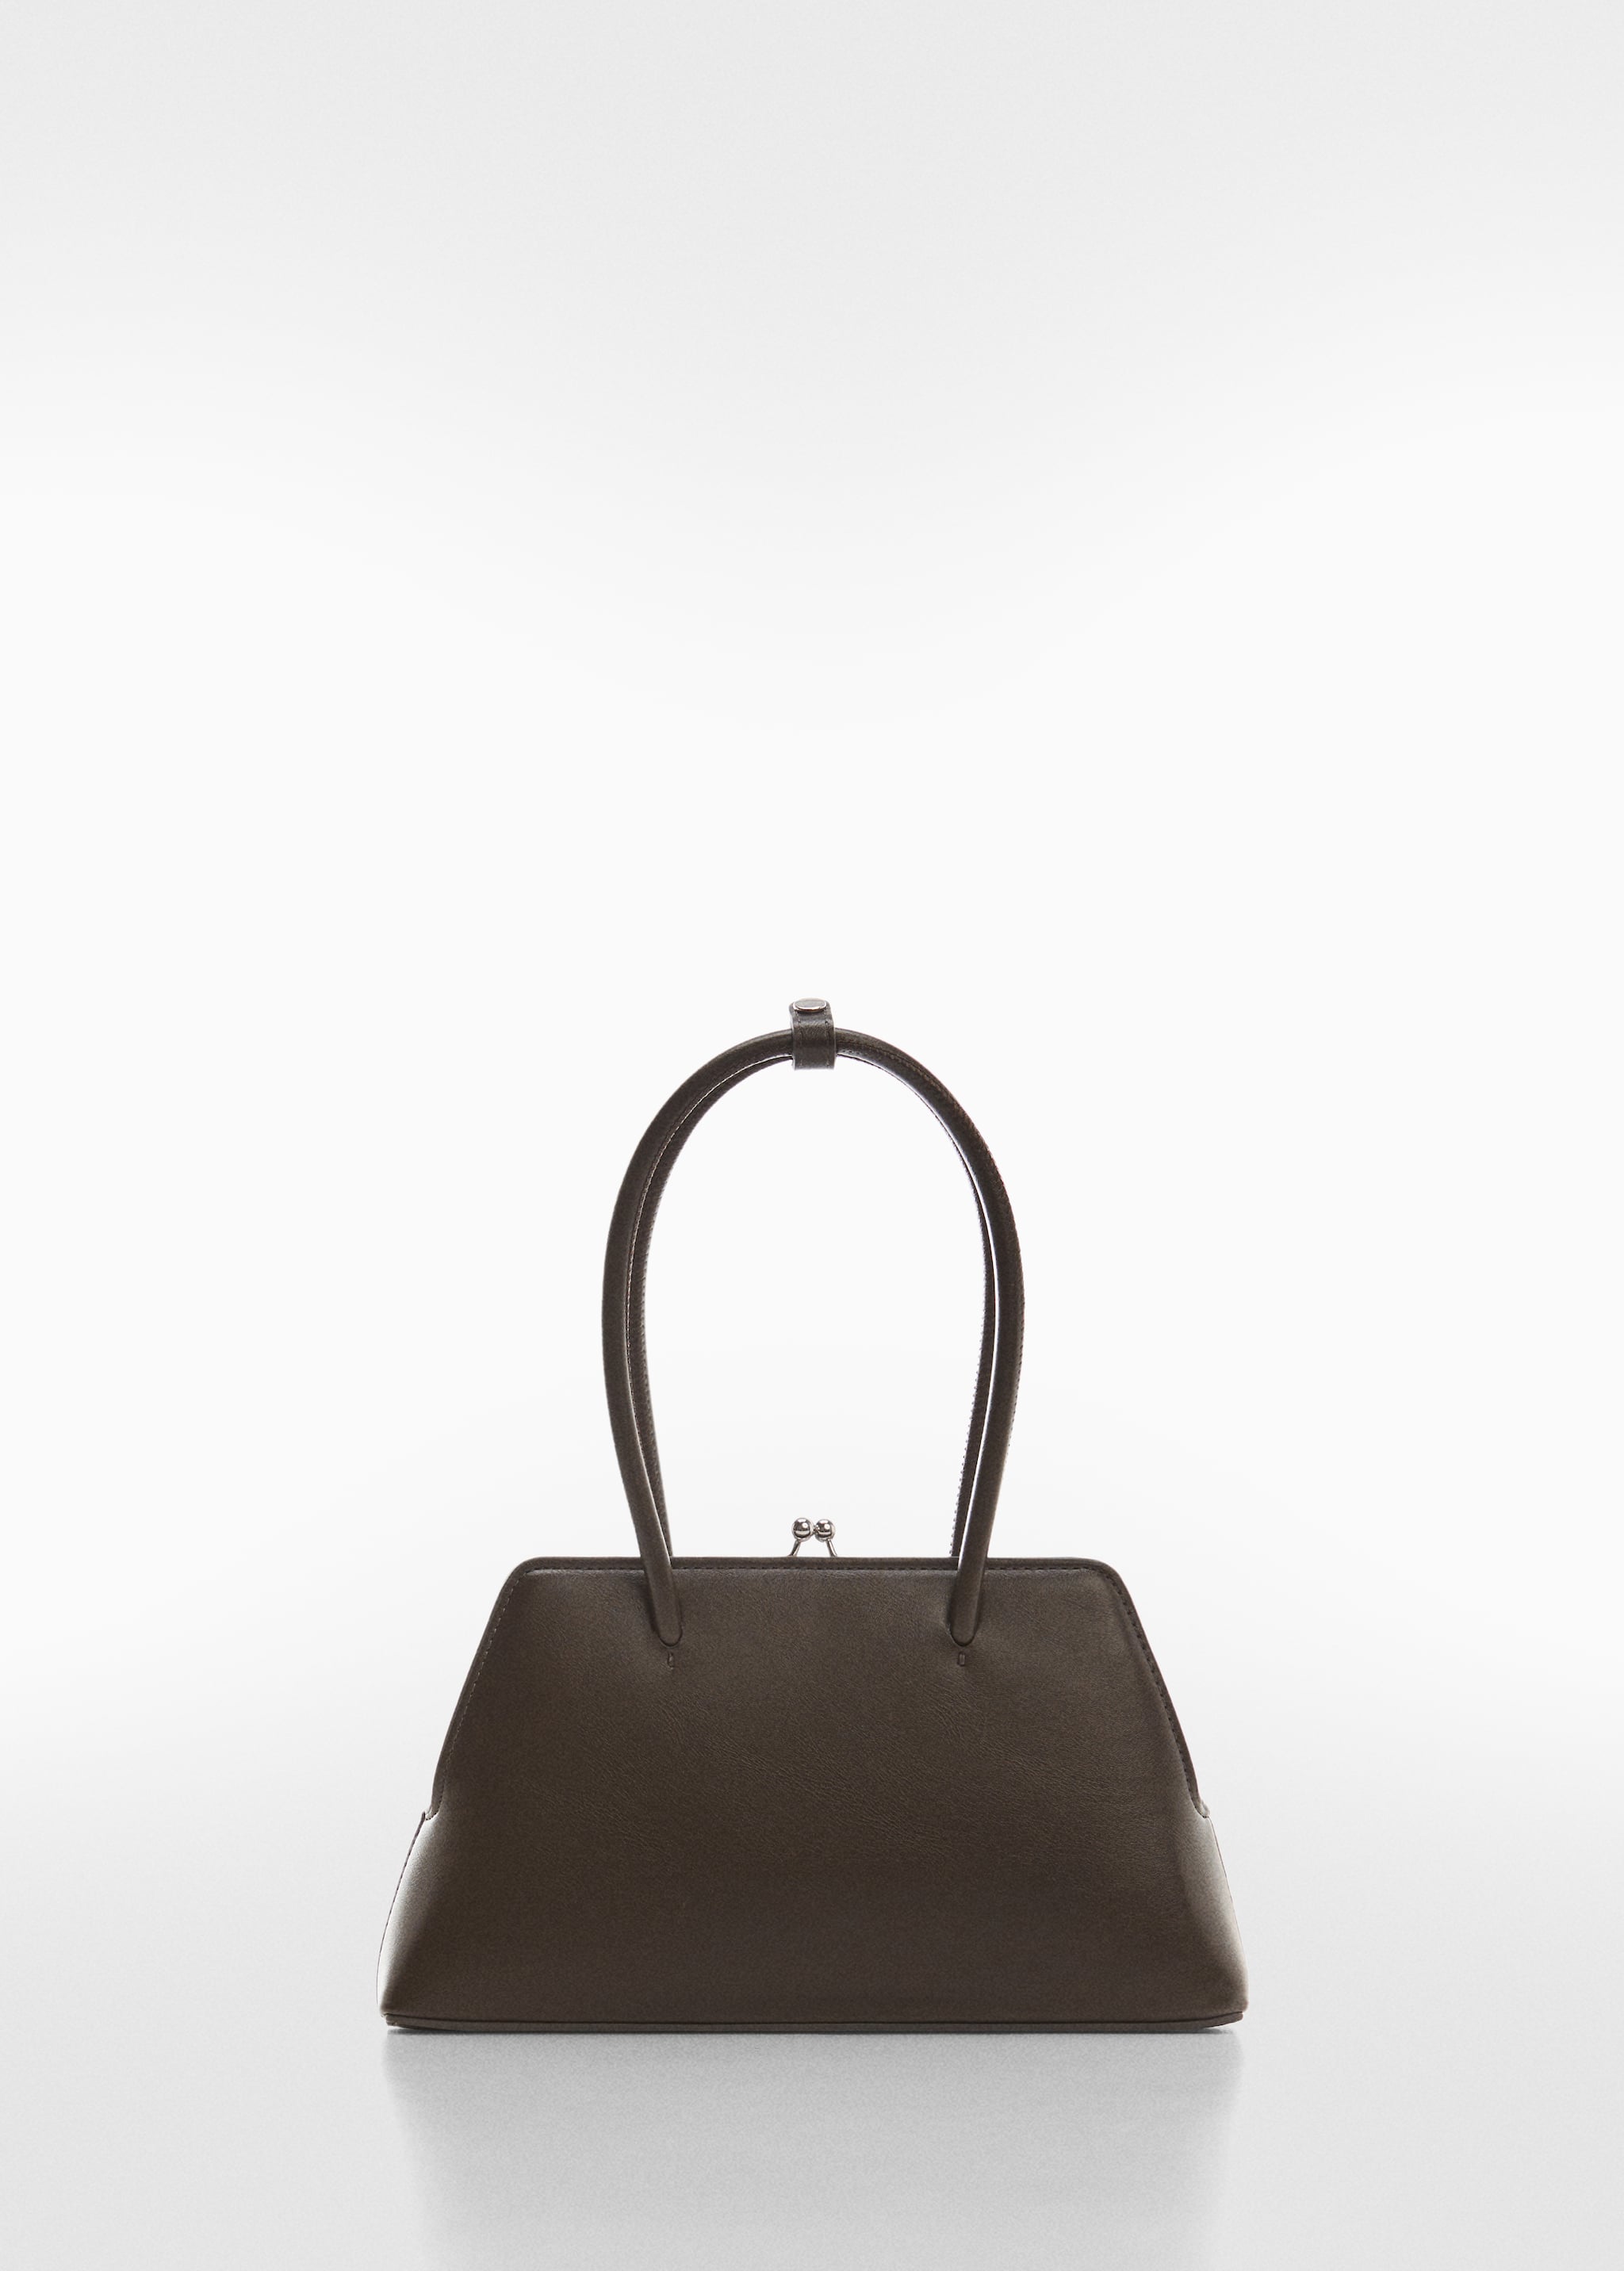 Double strap bag - Article without model